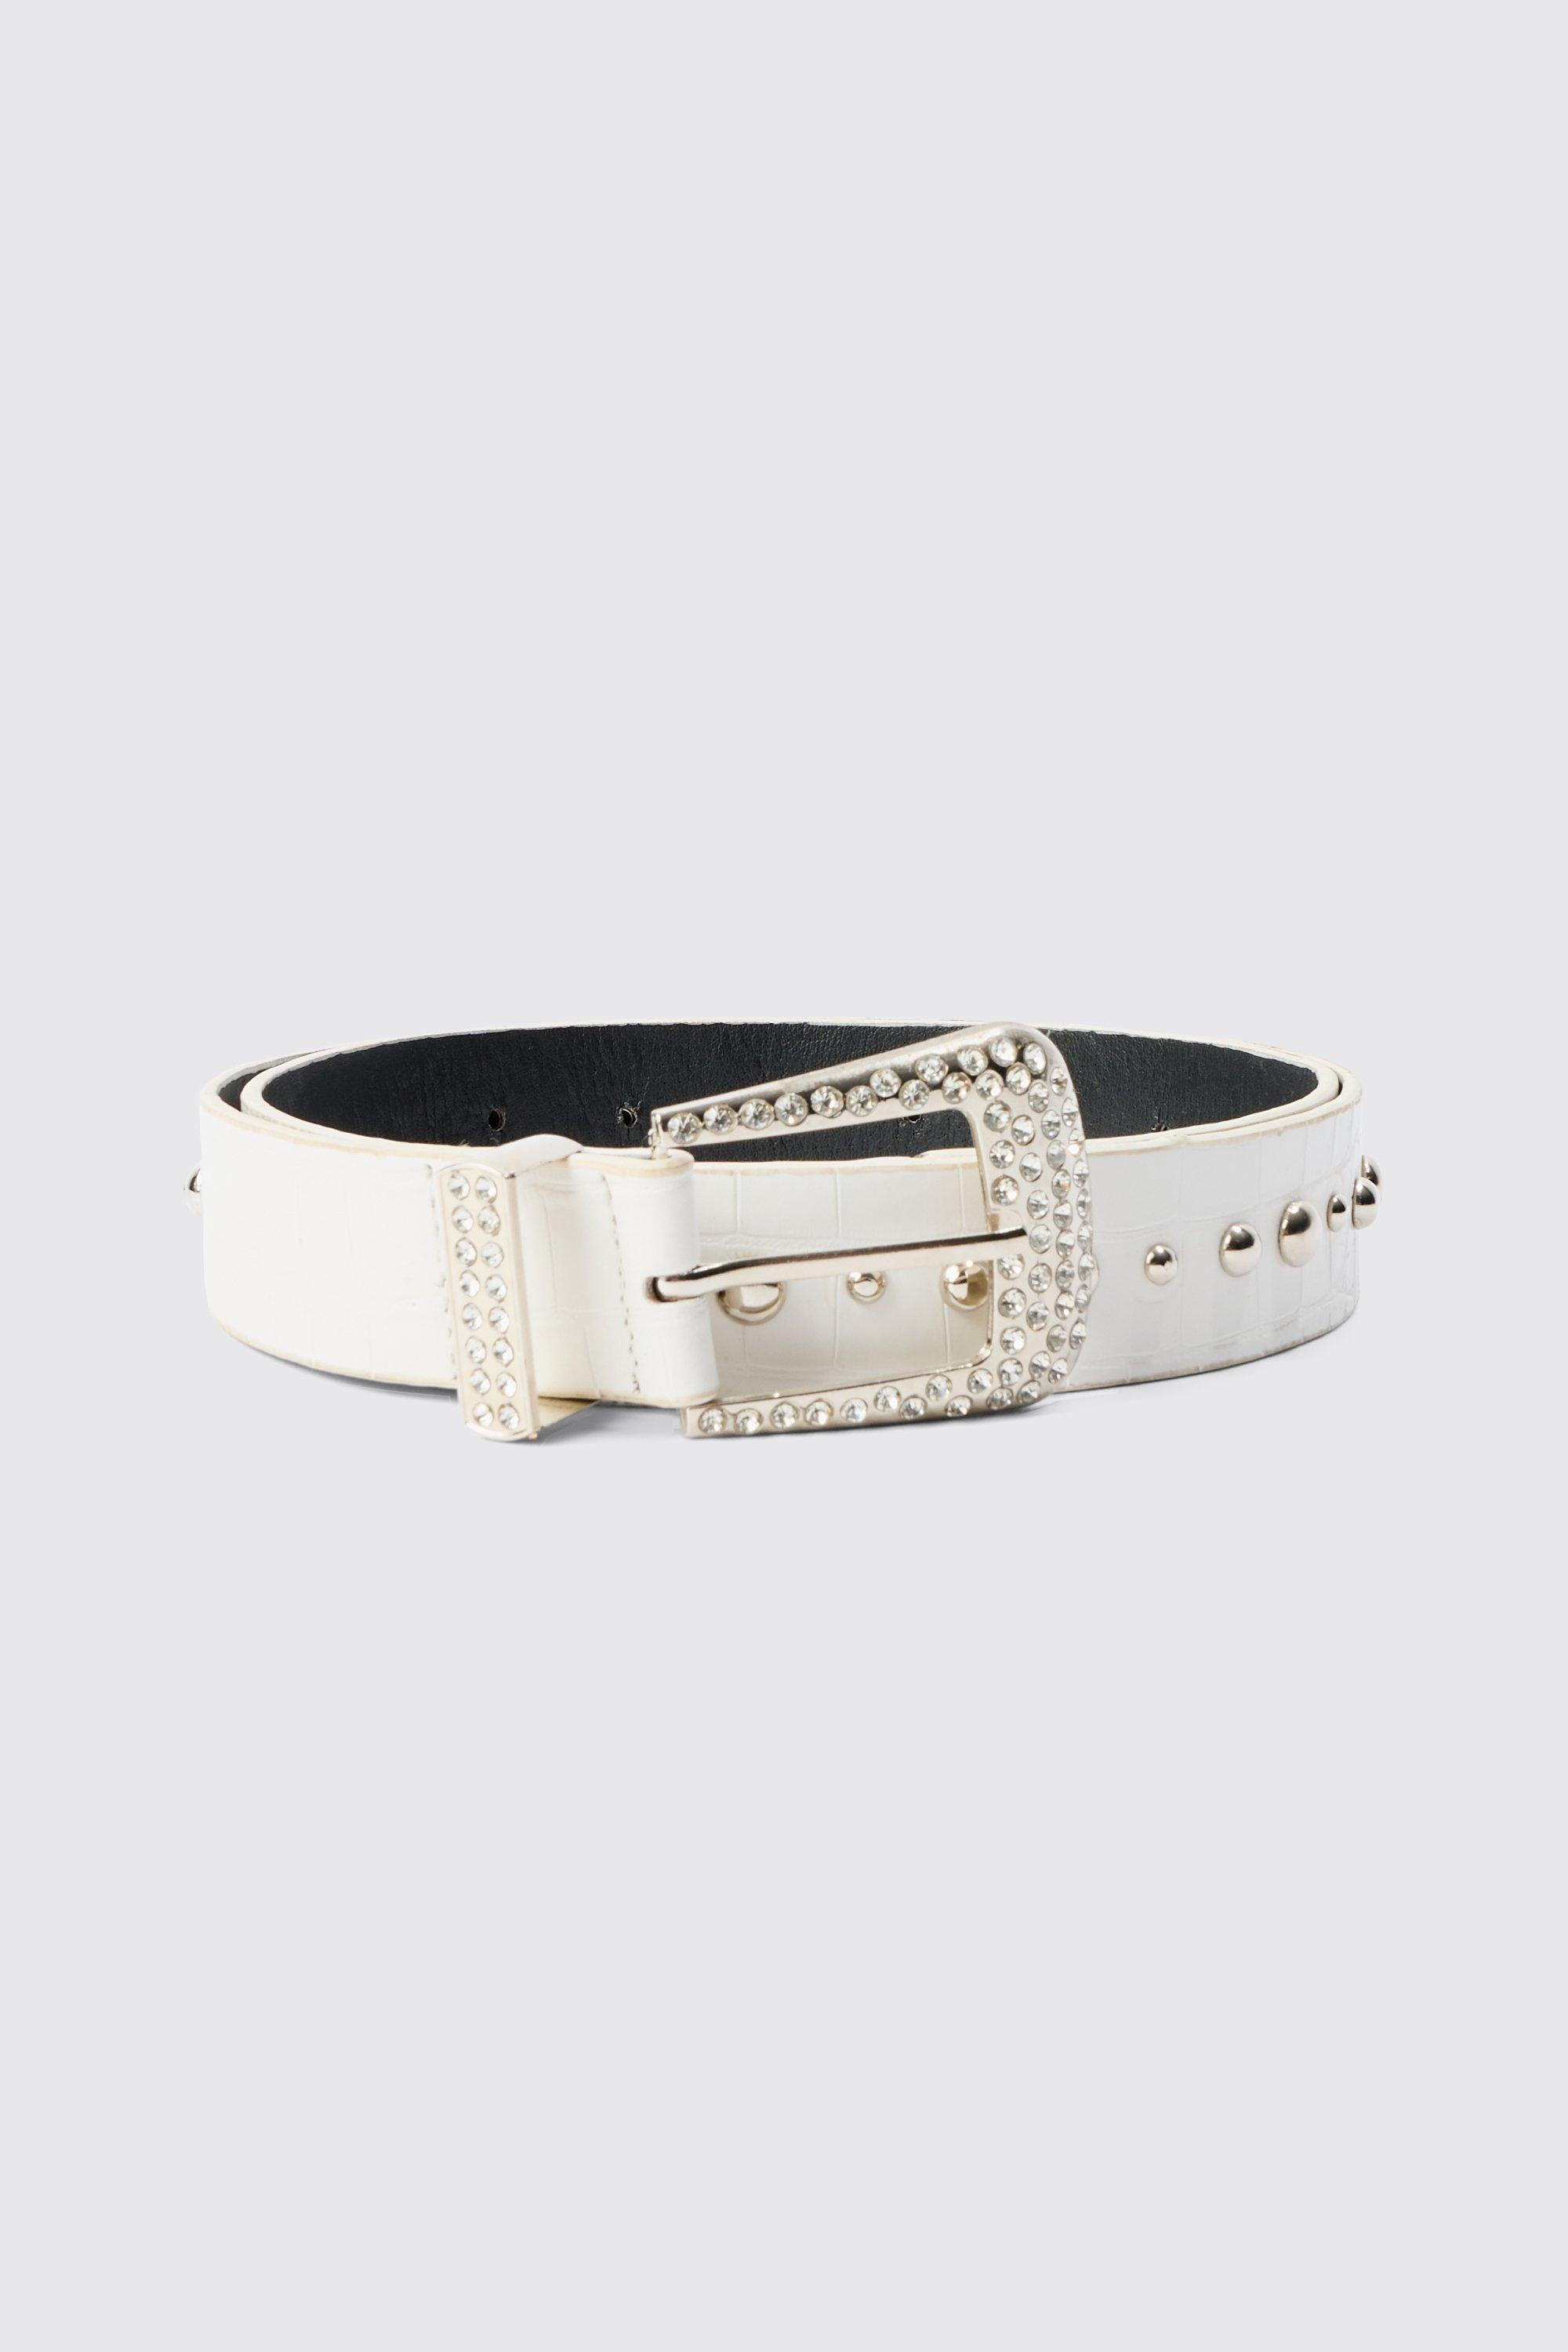 Boohoo Croc Detail Studded Western Belt With Gem Detailing On White, White